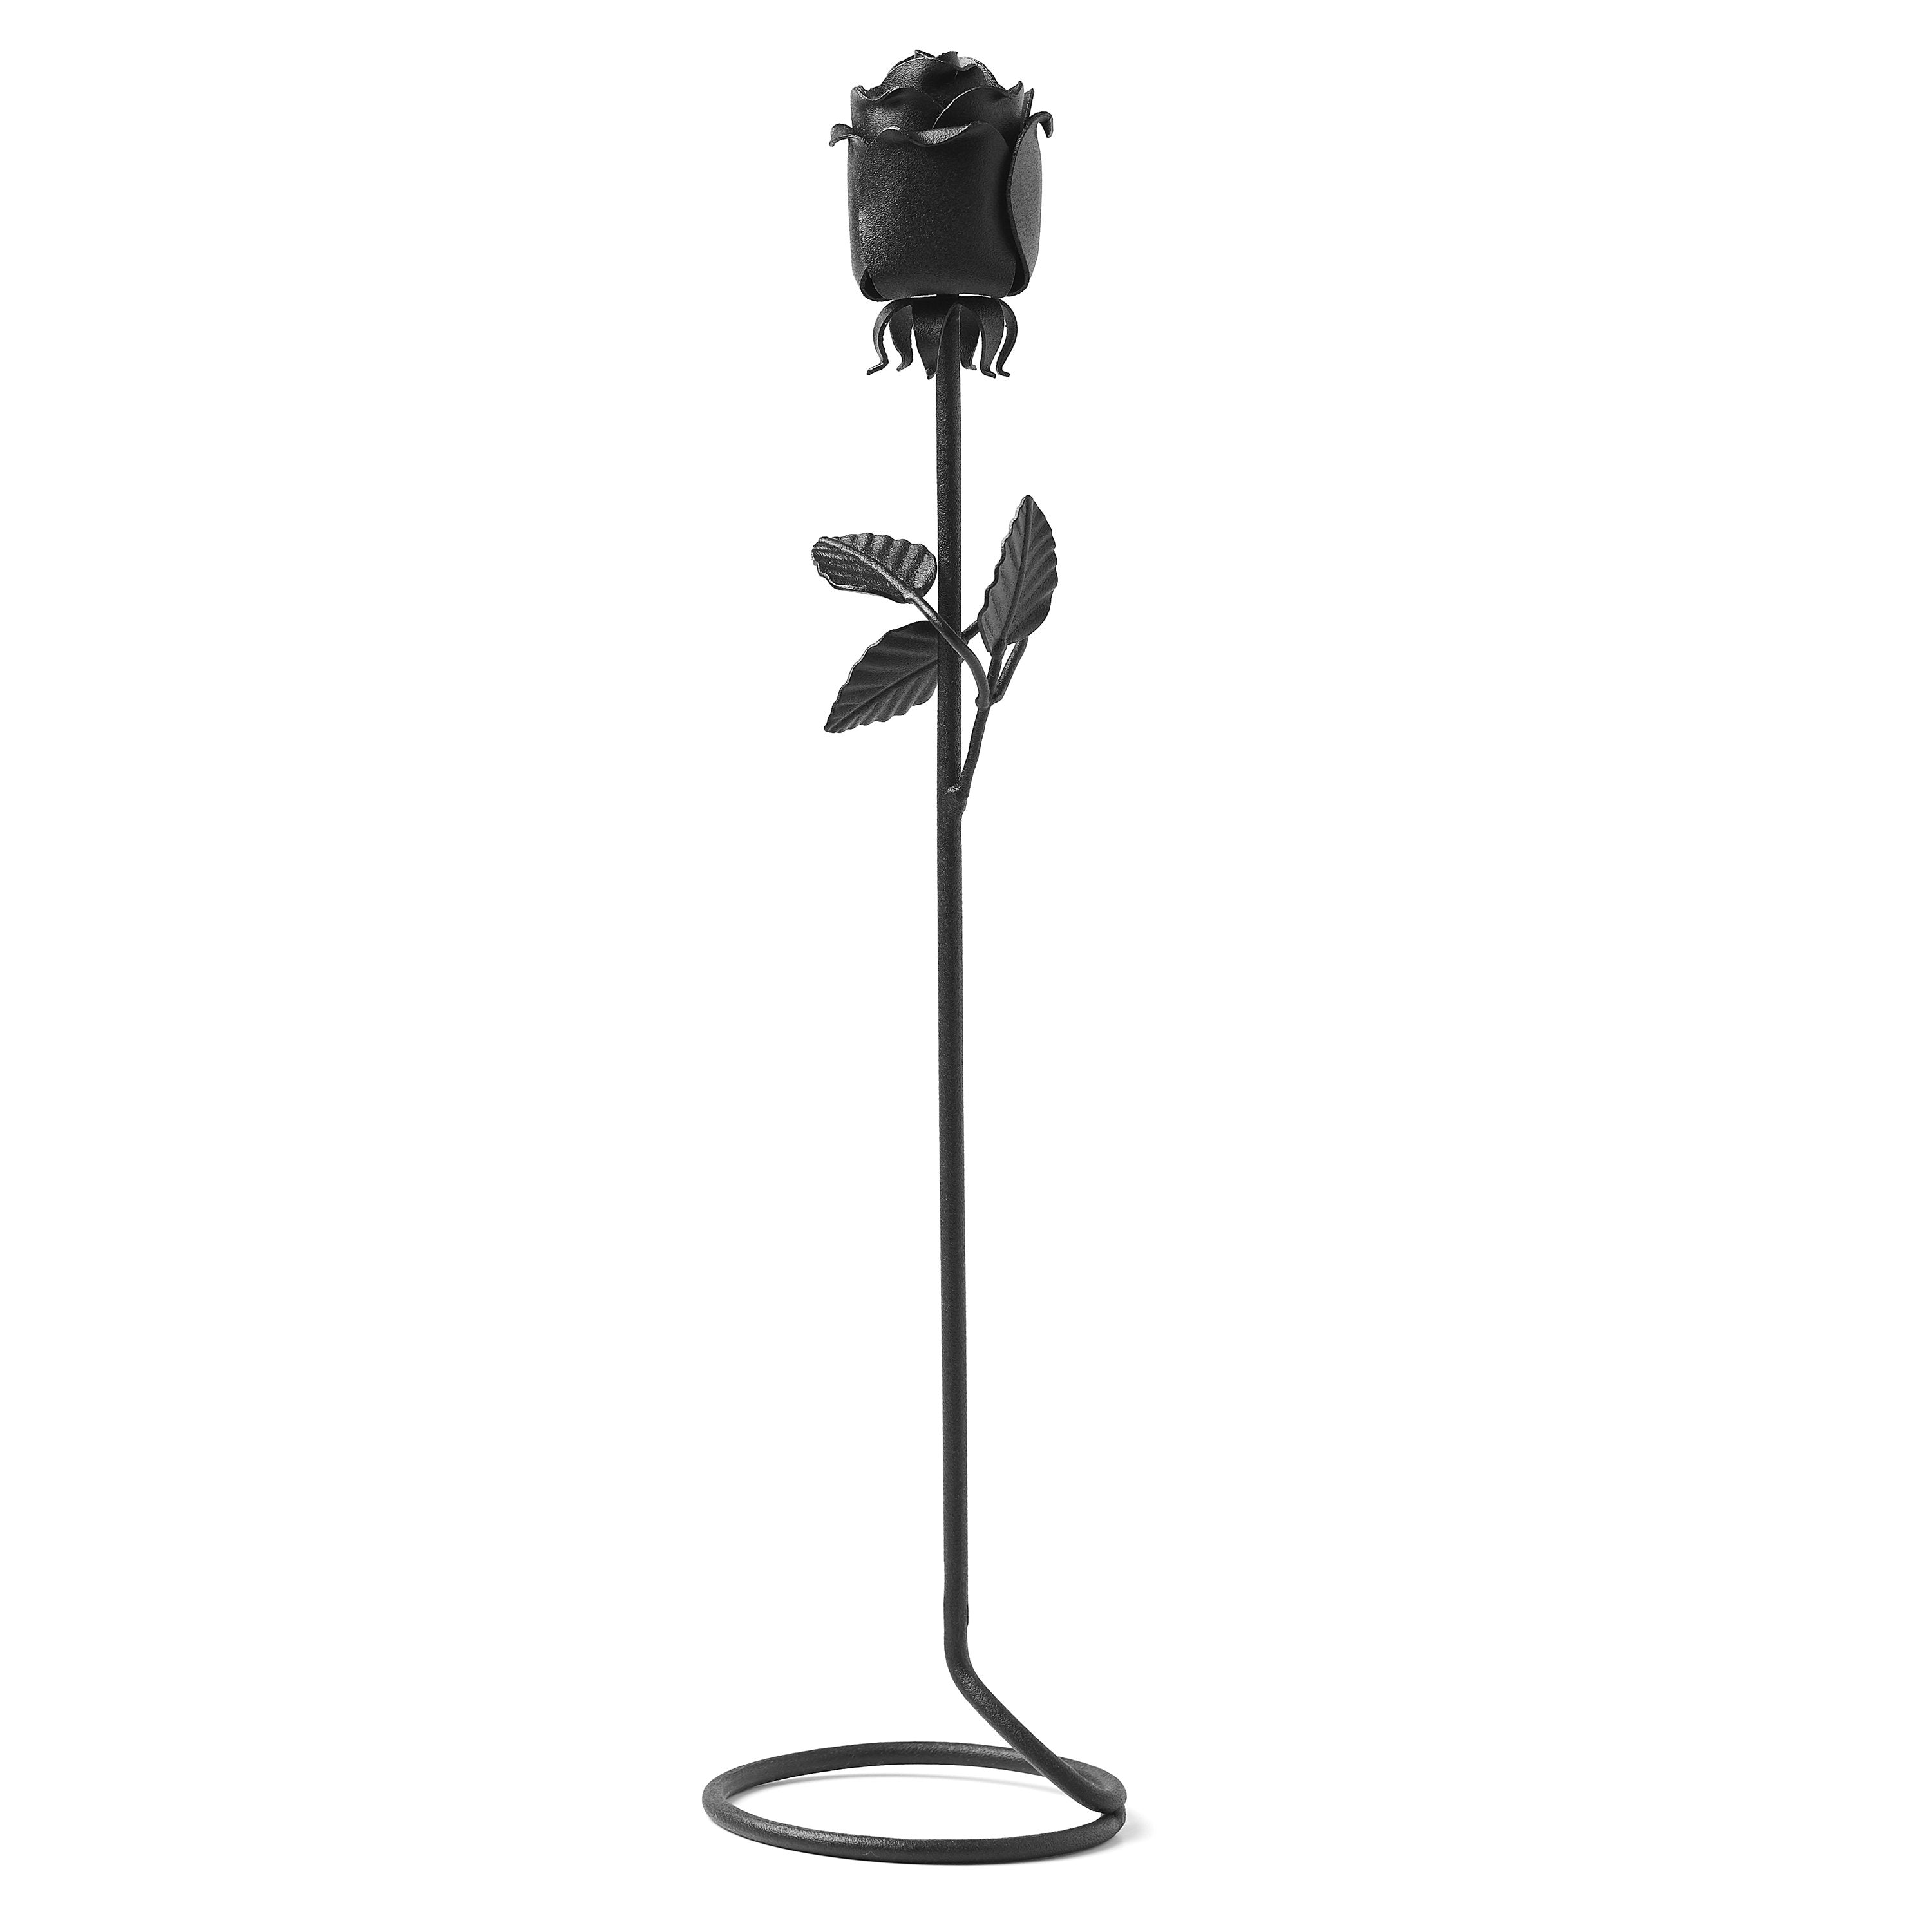 Hand Forged Iron Rose - Free Standing - 6th Anniversary Gift Everlasting Rose - Sixth Anniversary idea FAST delivery to UK and US